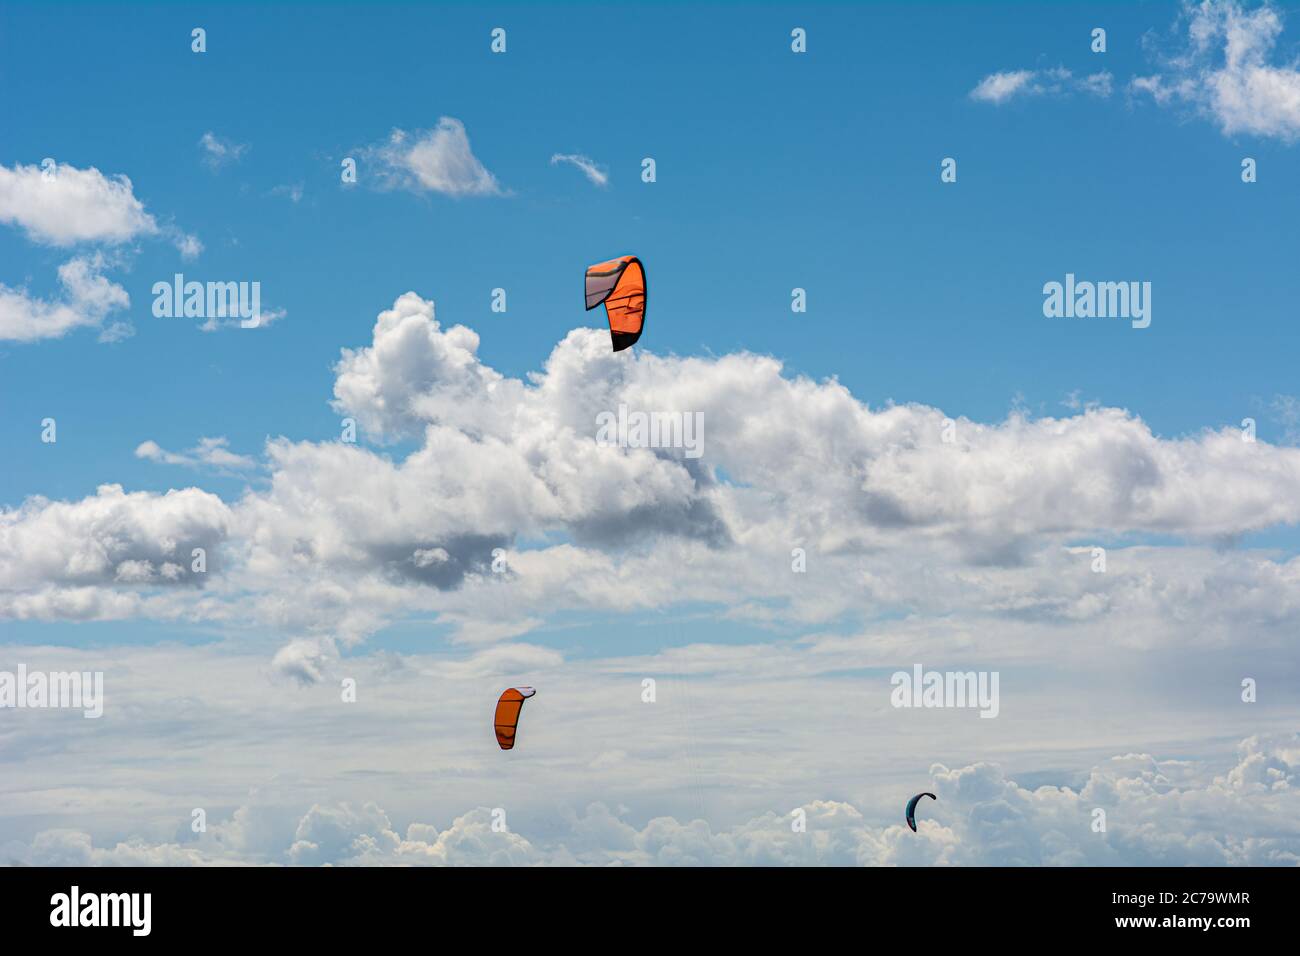 Malmo, Sweden - July 12, 2020: On a windy day many people take the opportunity to do watersports. Kitesurfers gather near Lomma beach to practice their kite surfing skills Stock Photo